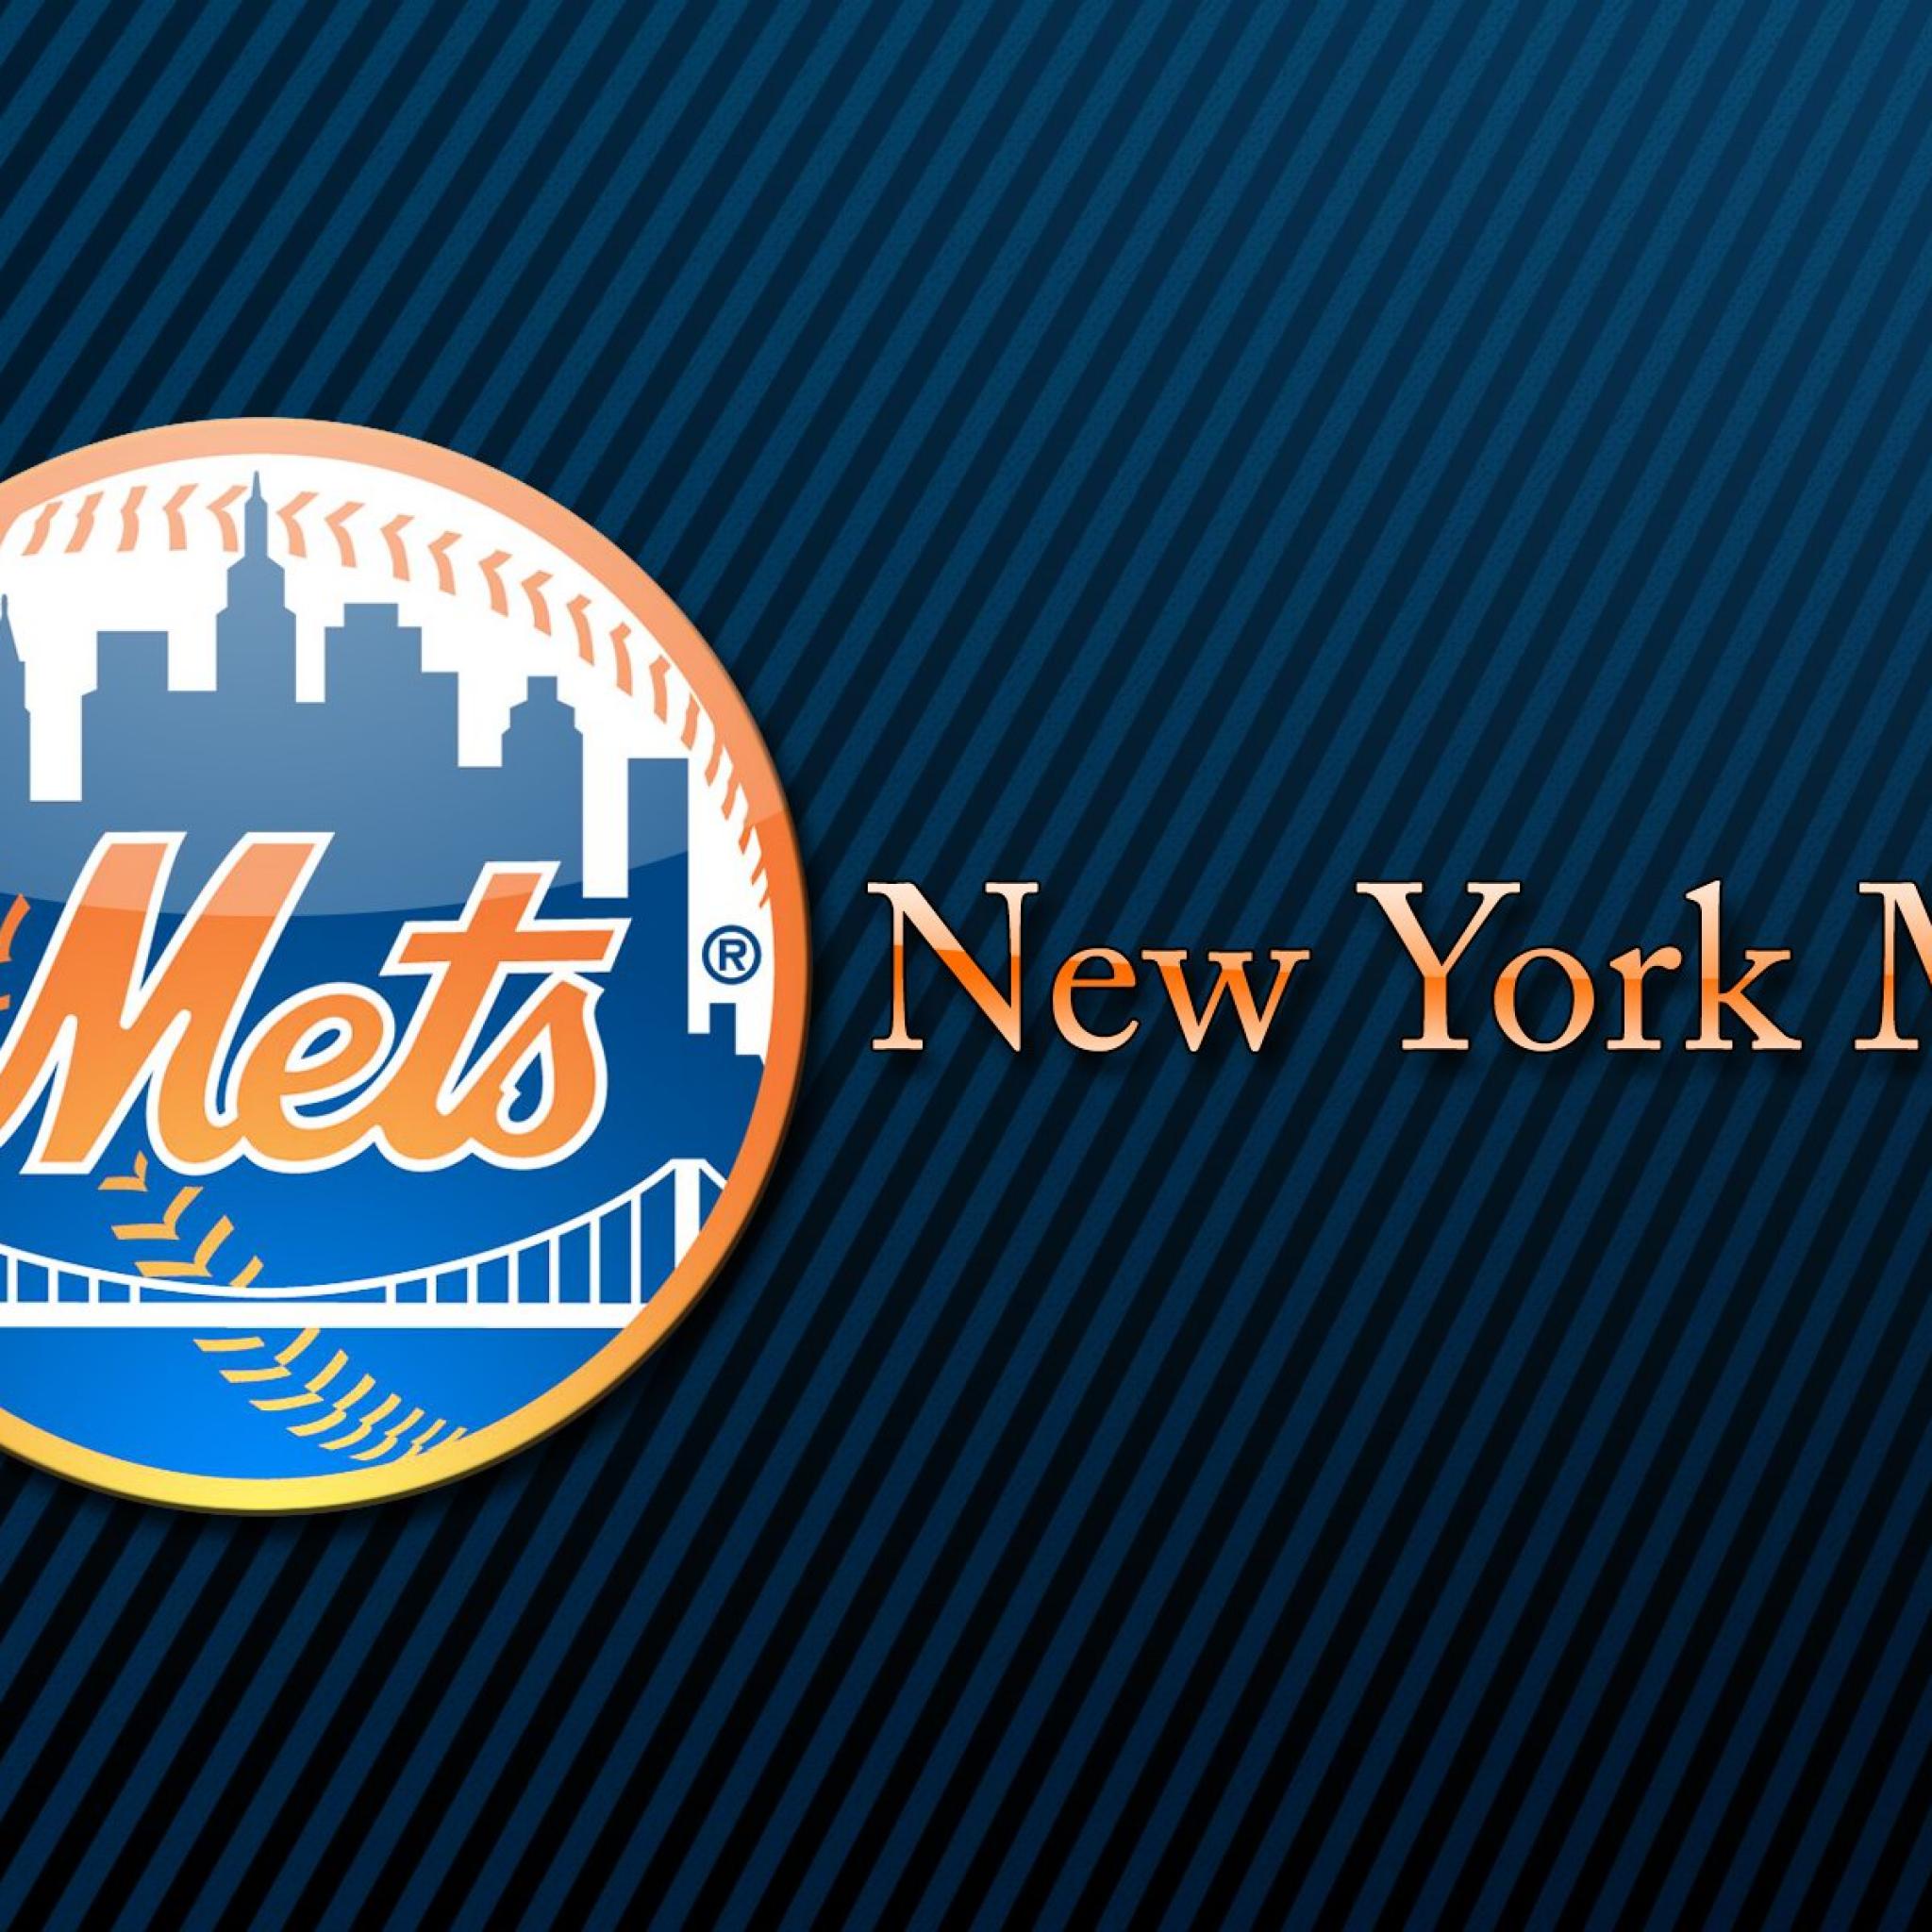 Baseball Wallpapers New York Mets Images Crazy Gallery 2048x2048